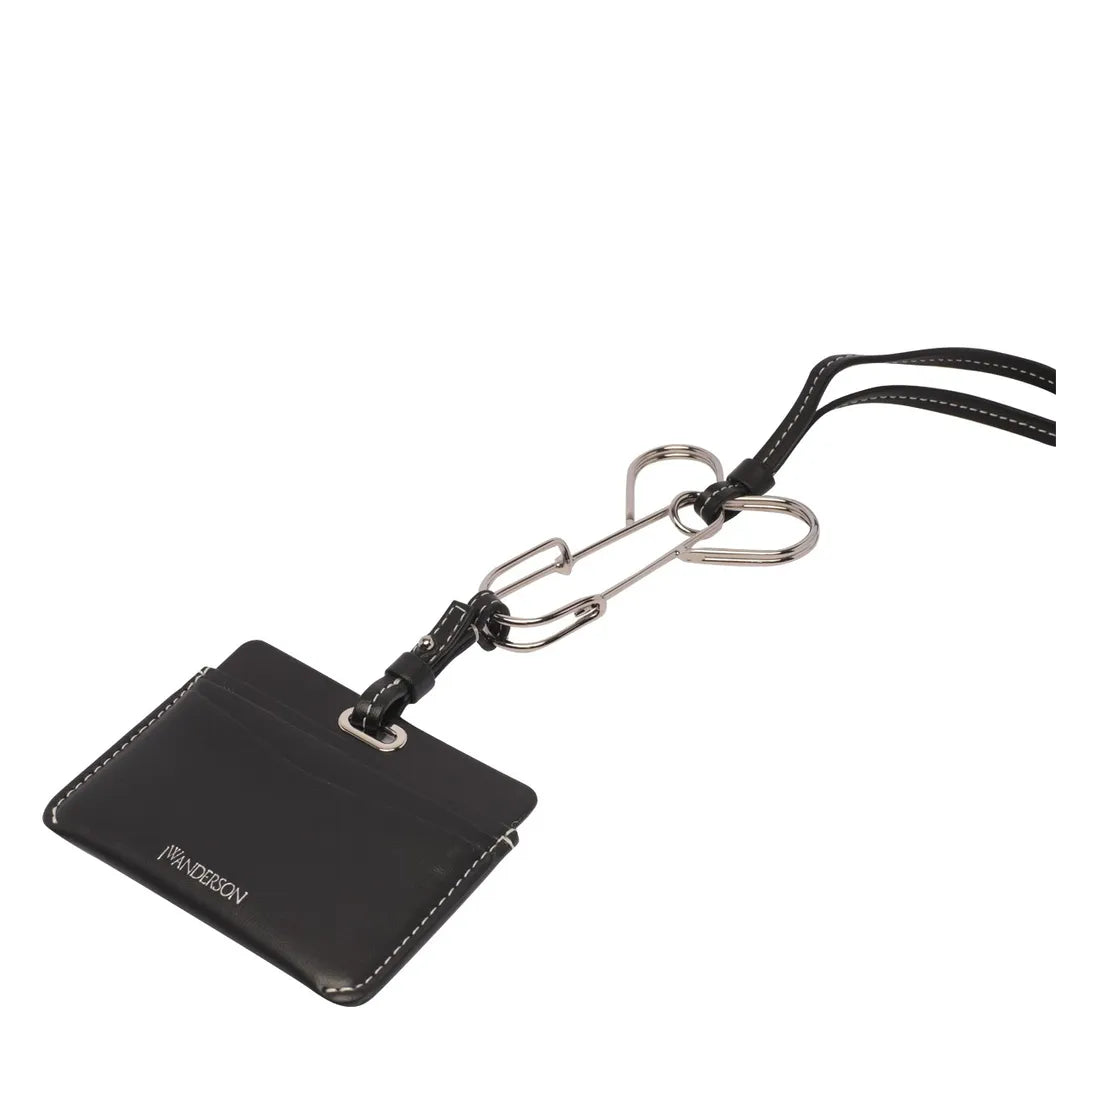 CARDHOLDER WITH PENIS PIN STRAP AC0275LA0268999